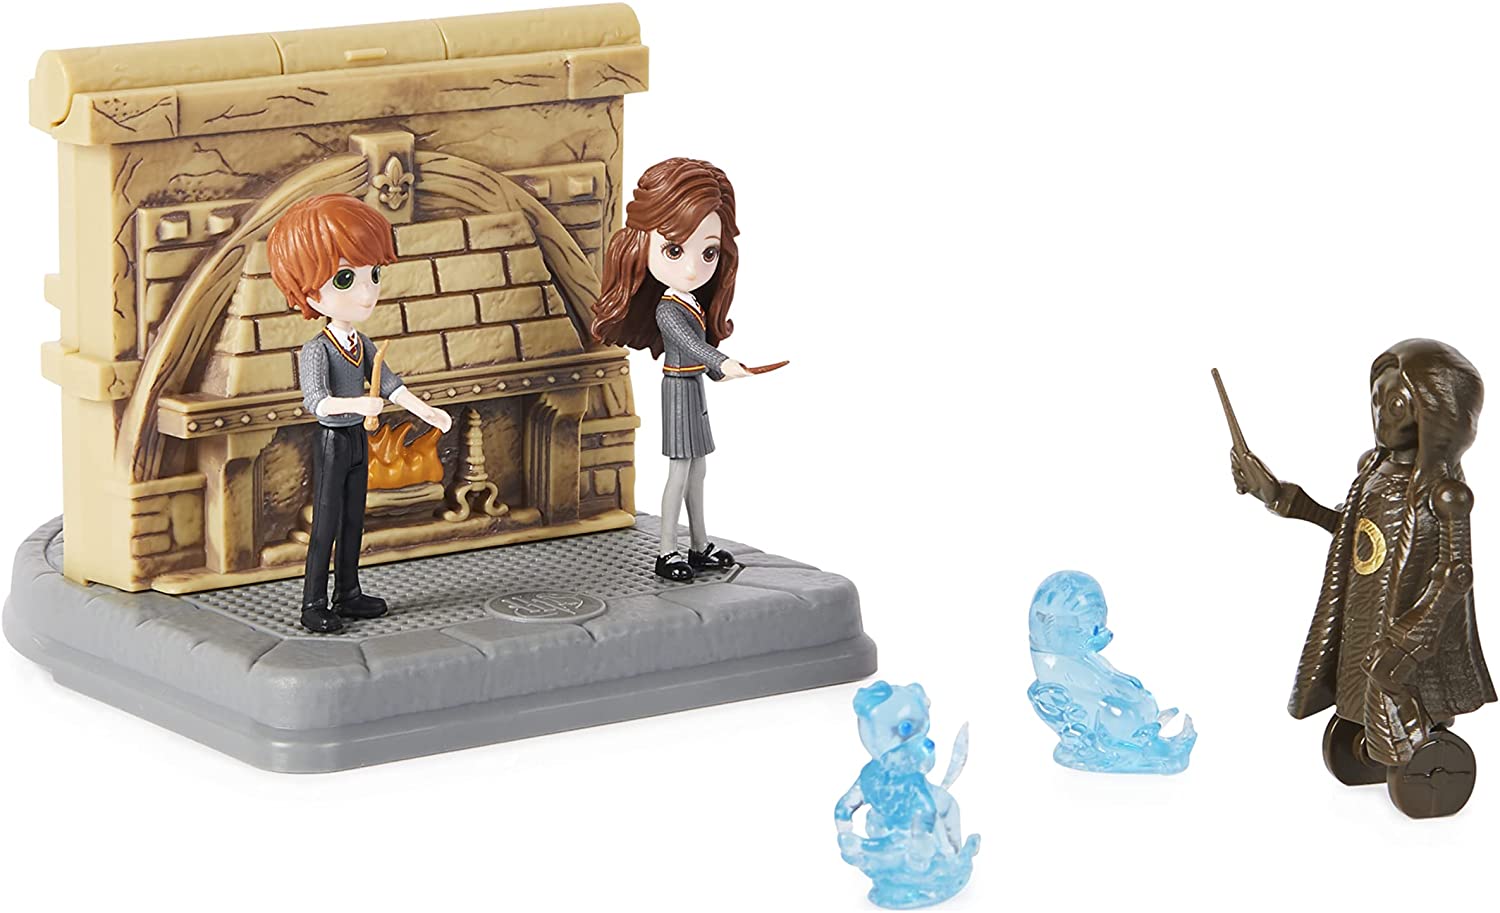 Wizarding World Magical Minis Harry Potter and Ginny Weasley Patronus Friendship Set with 2 Toy Figures and 2 Creatures Kids Toys for Ages 5 and up 